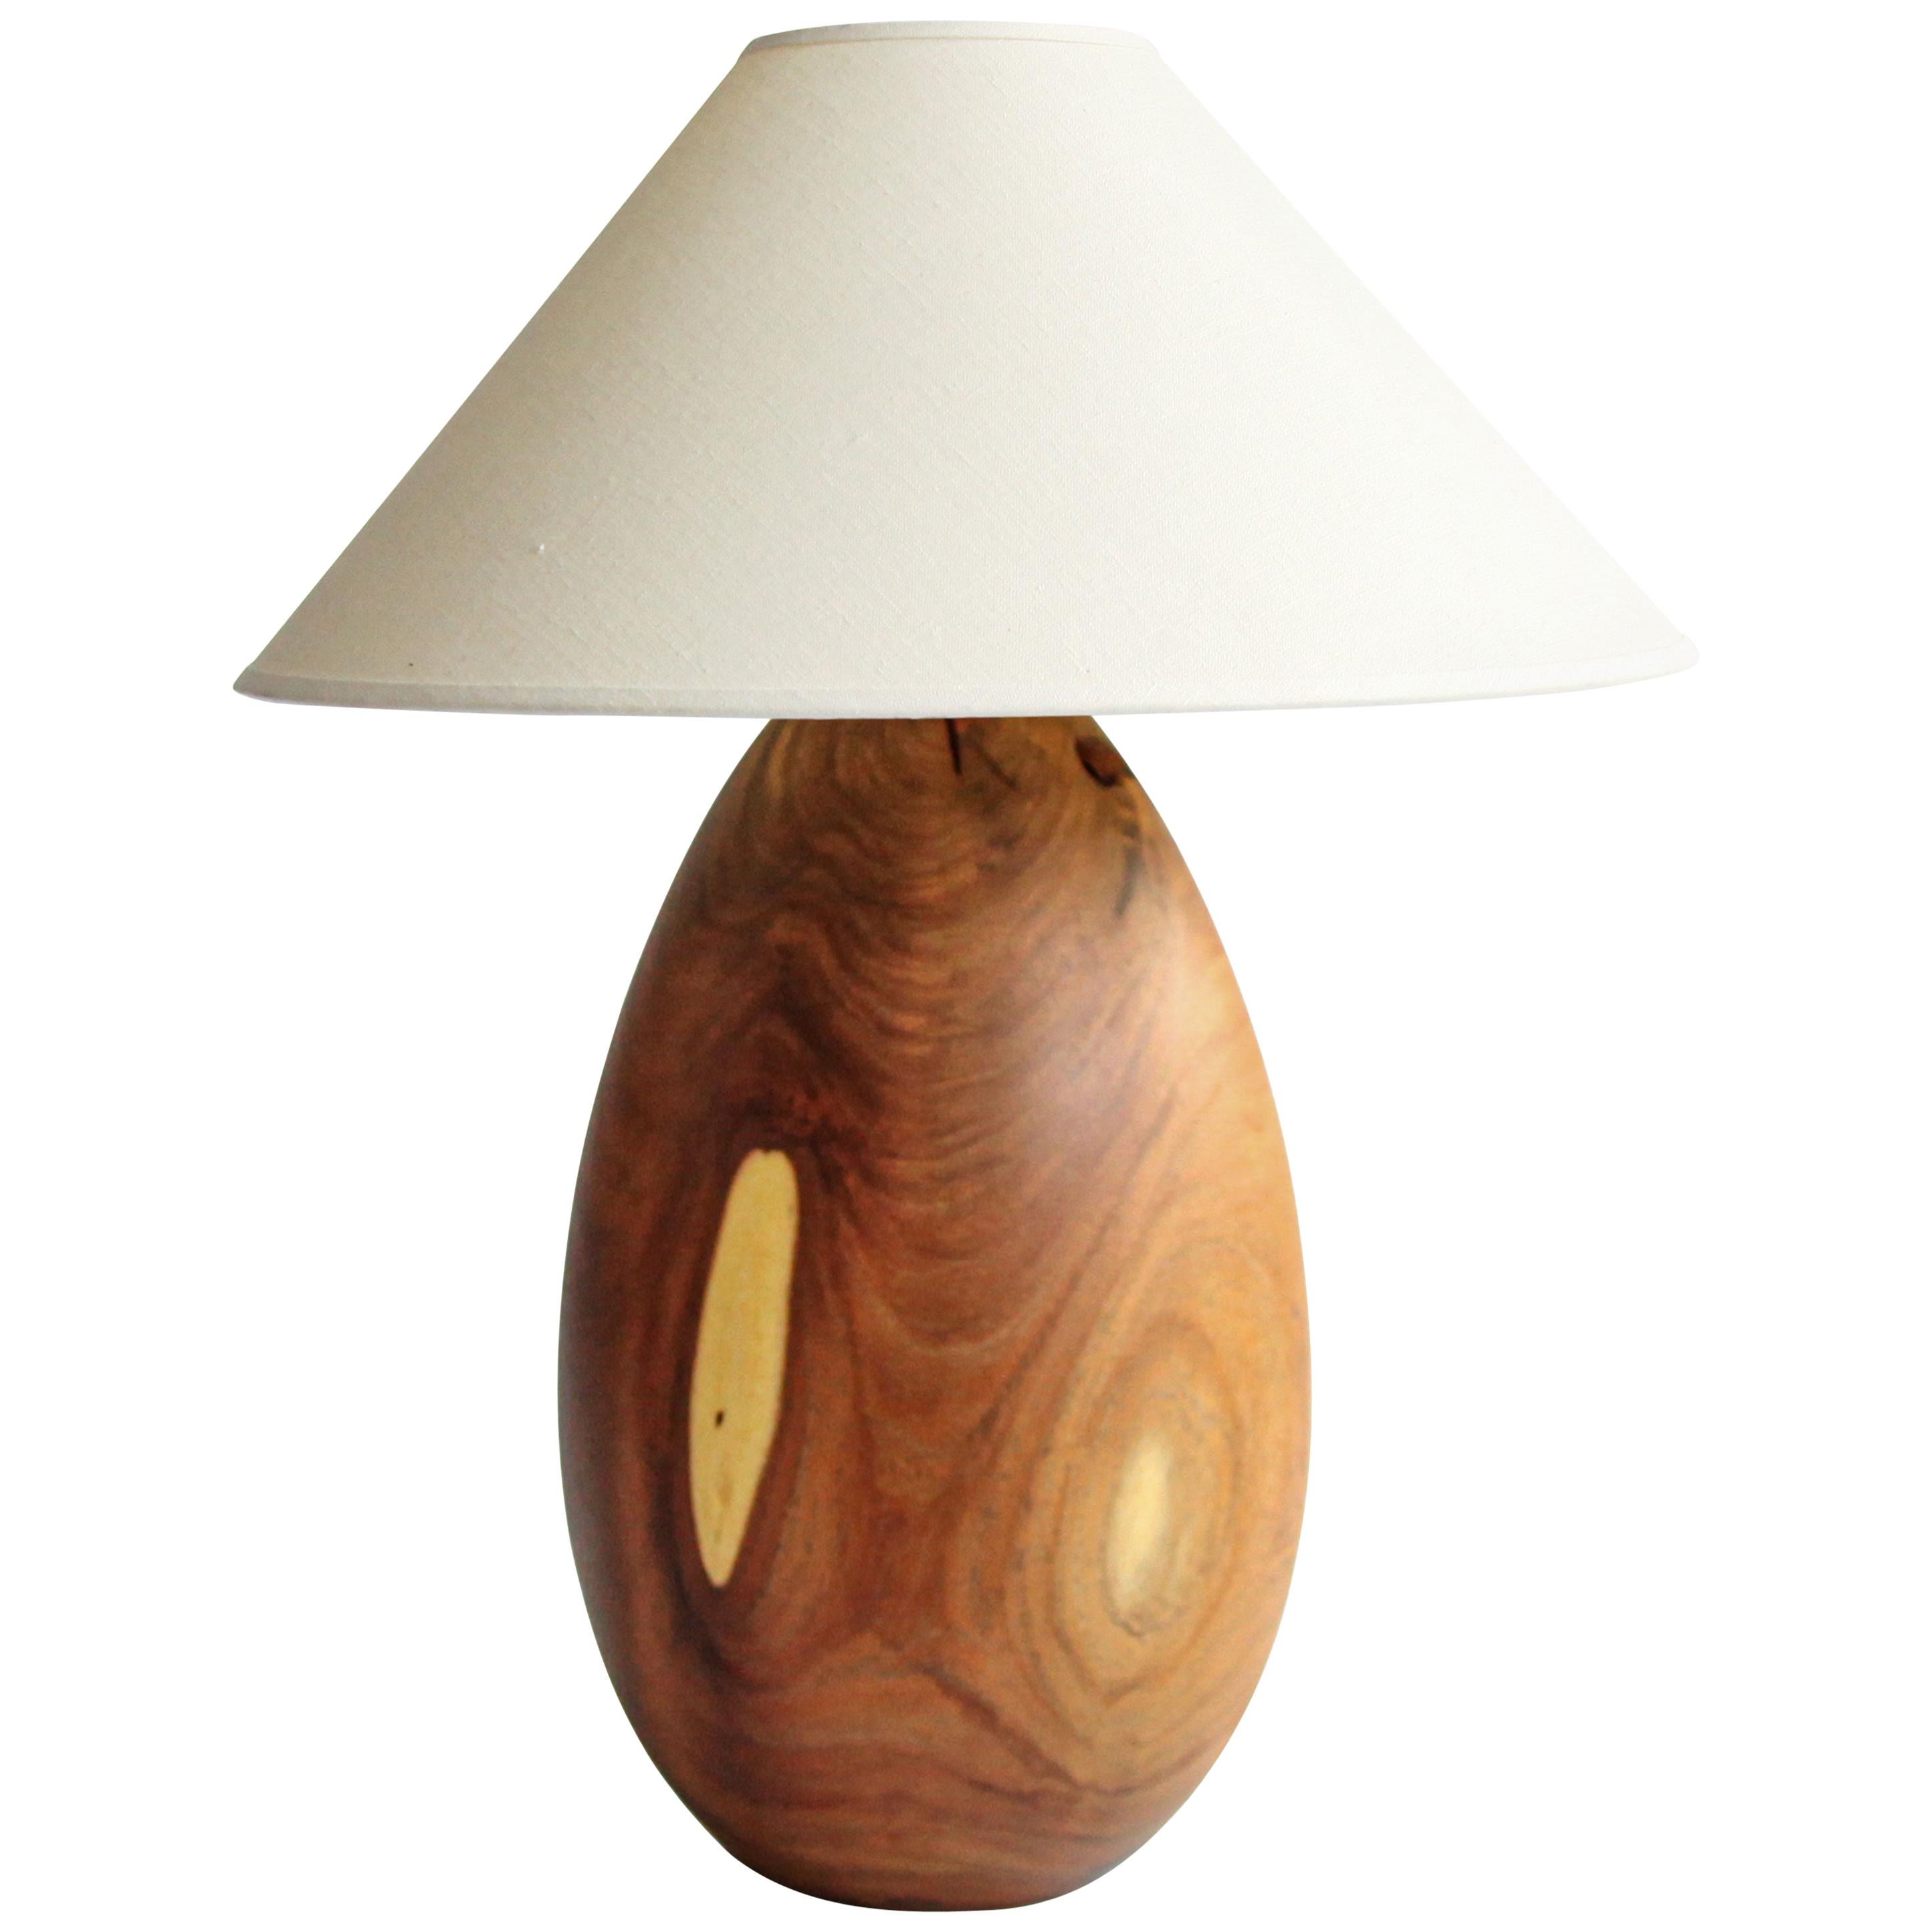 Bolivian Rosewood Lamp with White Linen Shade, Large, Árbol Collection, 5